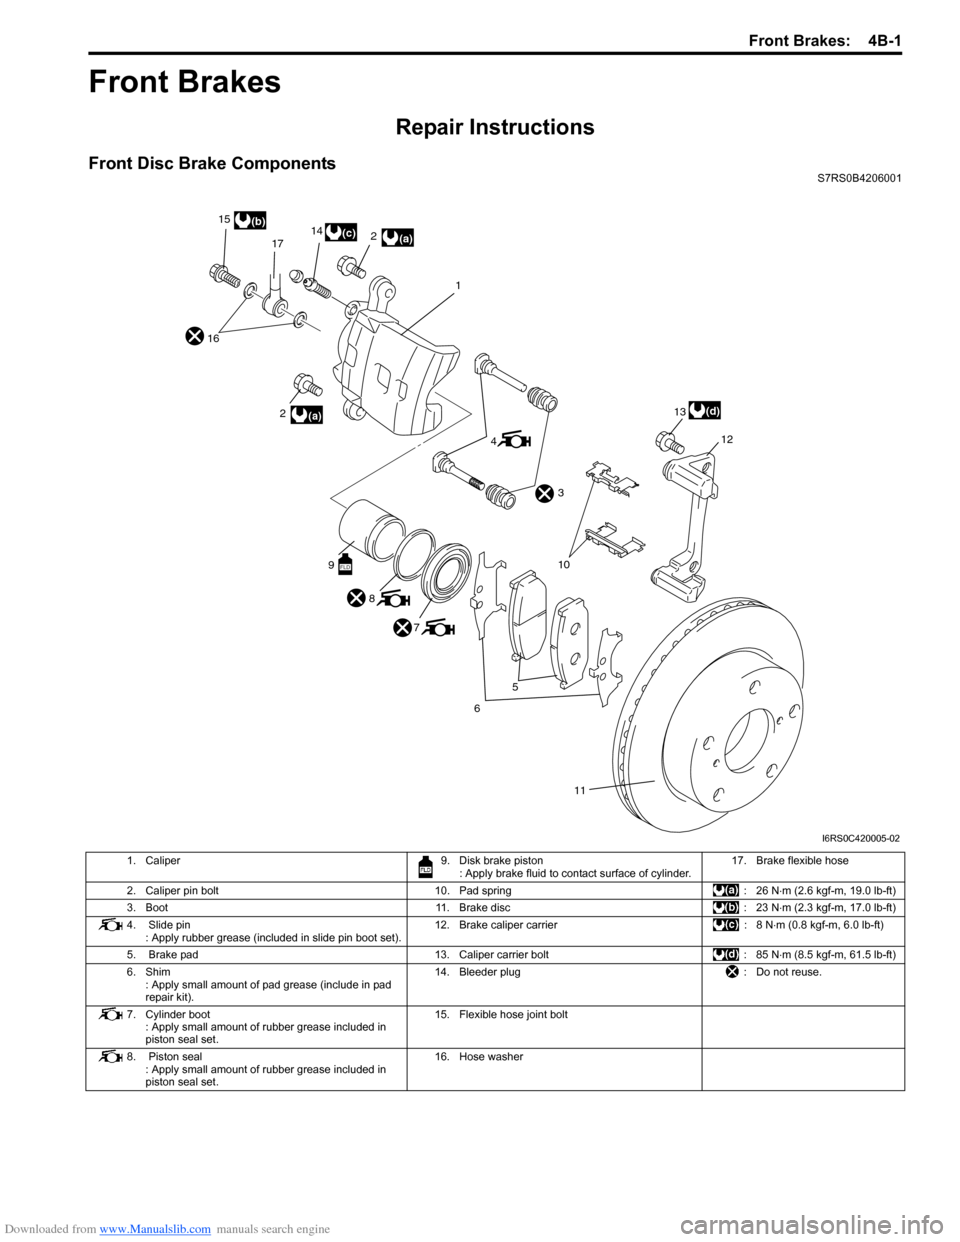 SUZUKI SWIFT 2007 2.G Service Workshop Manual Downloaded from www.Manualslib.com manuals search engine Front Brakes:  4B-1
Brakes
Front Brakes
Repair Instructions
Front Disc Brake ComponentsS7RS0B4206001
11
5
6
10
4
1
16
17
12
8
7
3
2(a)
15
(b)
1